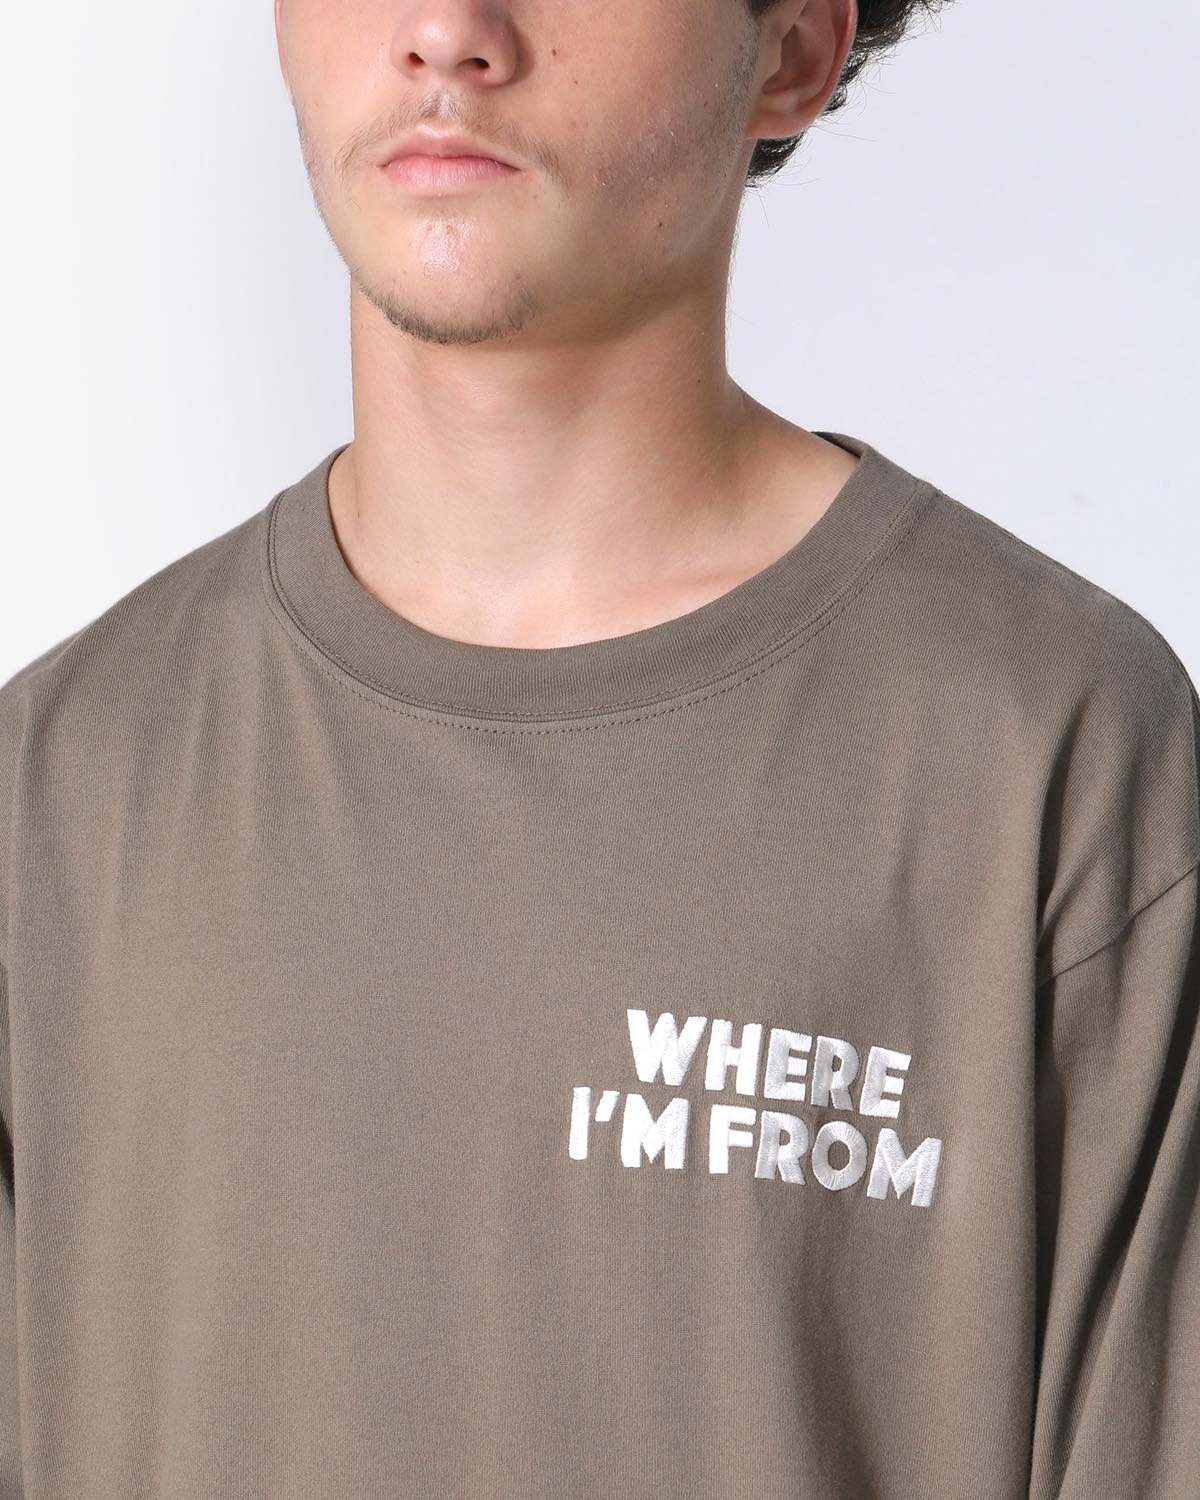 DWELLER L/S TEE "WHERE I'M FROM"